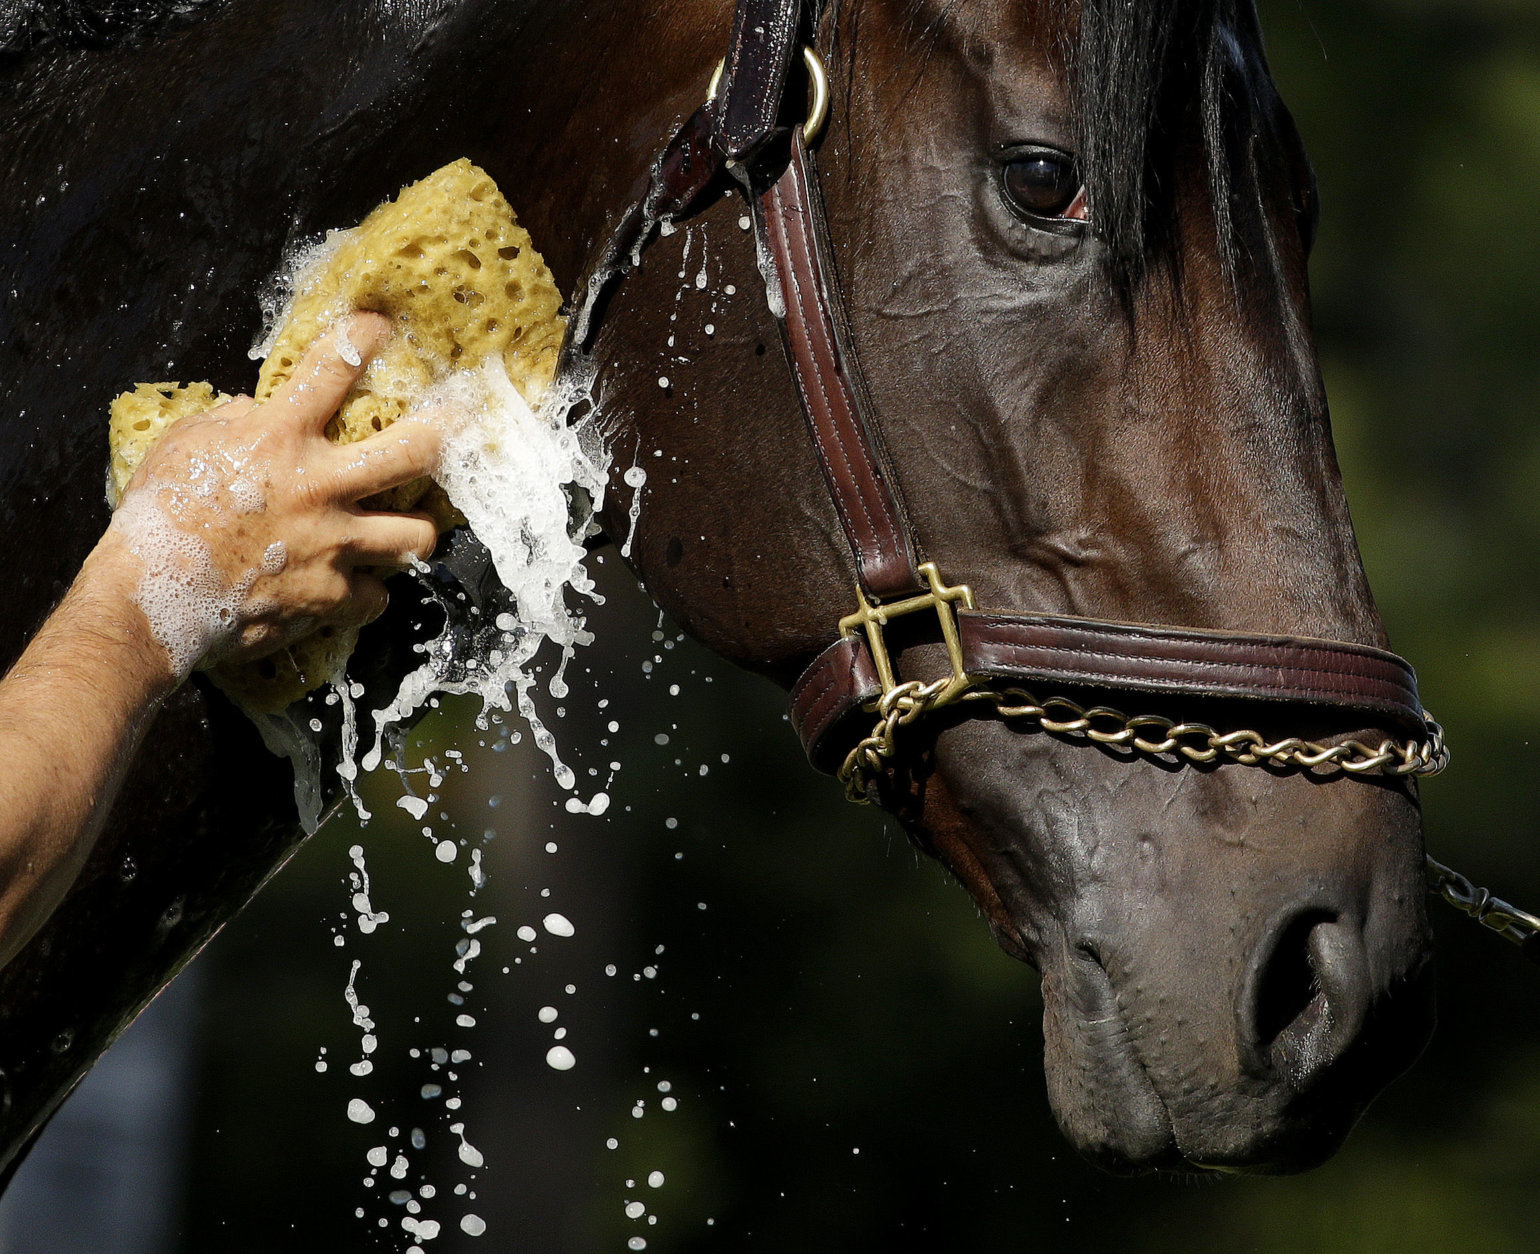 Kentucky Derby hopeful Enticed gets a bath after a morning workout at Churchill Downs Tuesday, May 1, 2018, in Louisville, Ky. The 144th running of the Kentucky Derby is scheduled for Saturday, May 5. (AP Photo/Charlie Riedel)